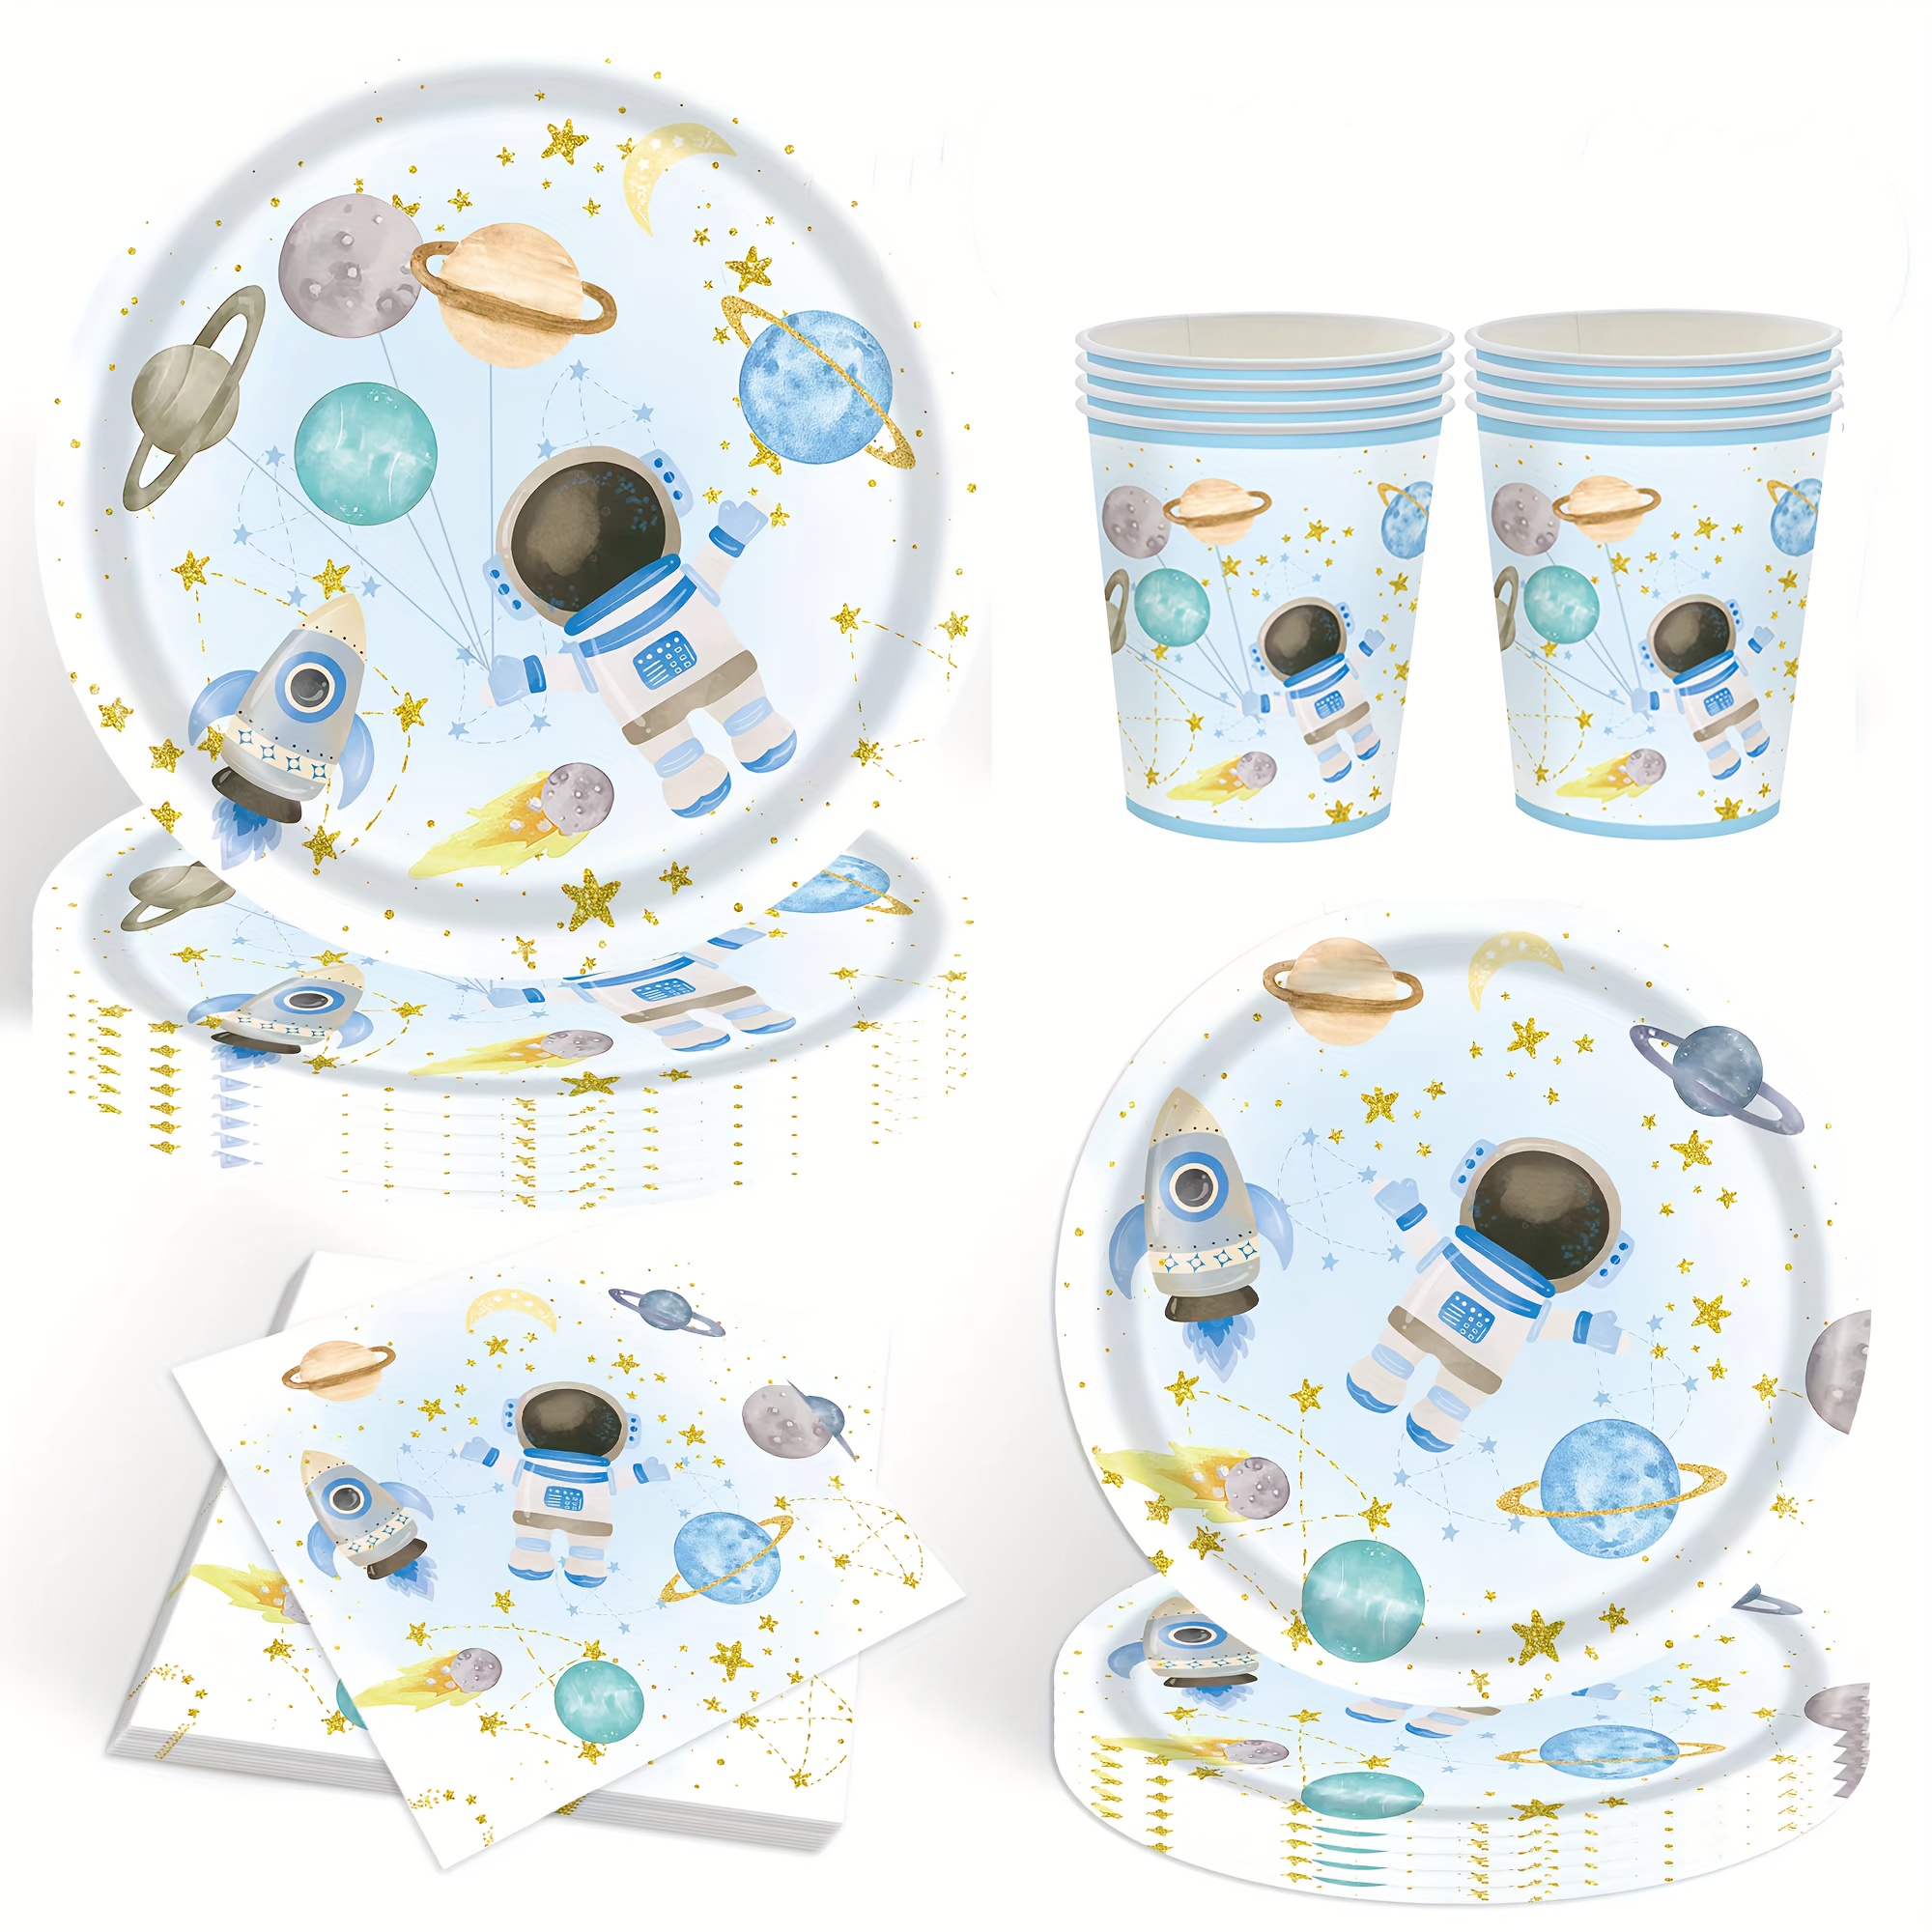 

68-piece Outer Space - Blue Galaxy & Astronaut Themed Tableware Set With Plates, Cups, Napkins For Birthday Celebrations Space Party Decorations Space Birthday Decorations